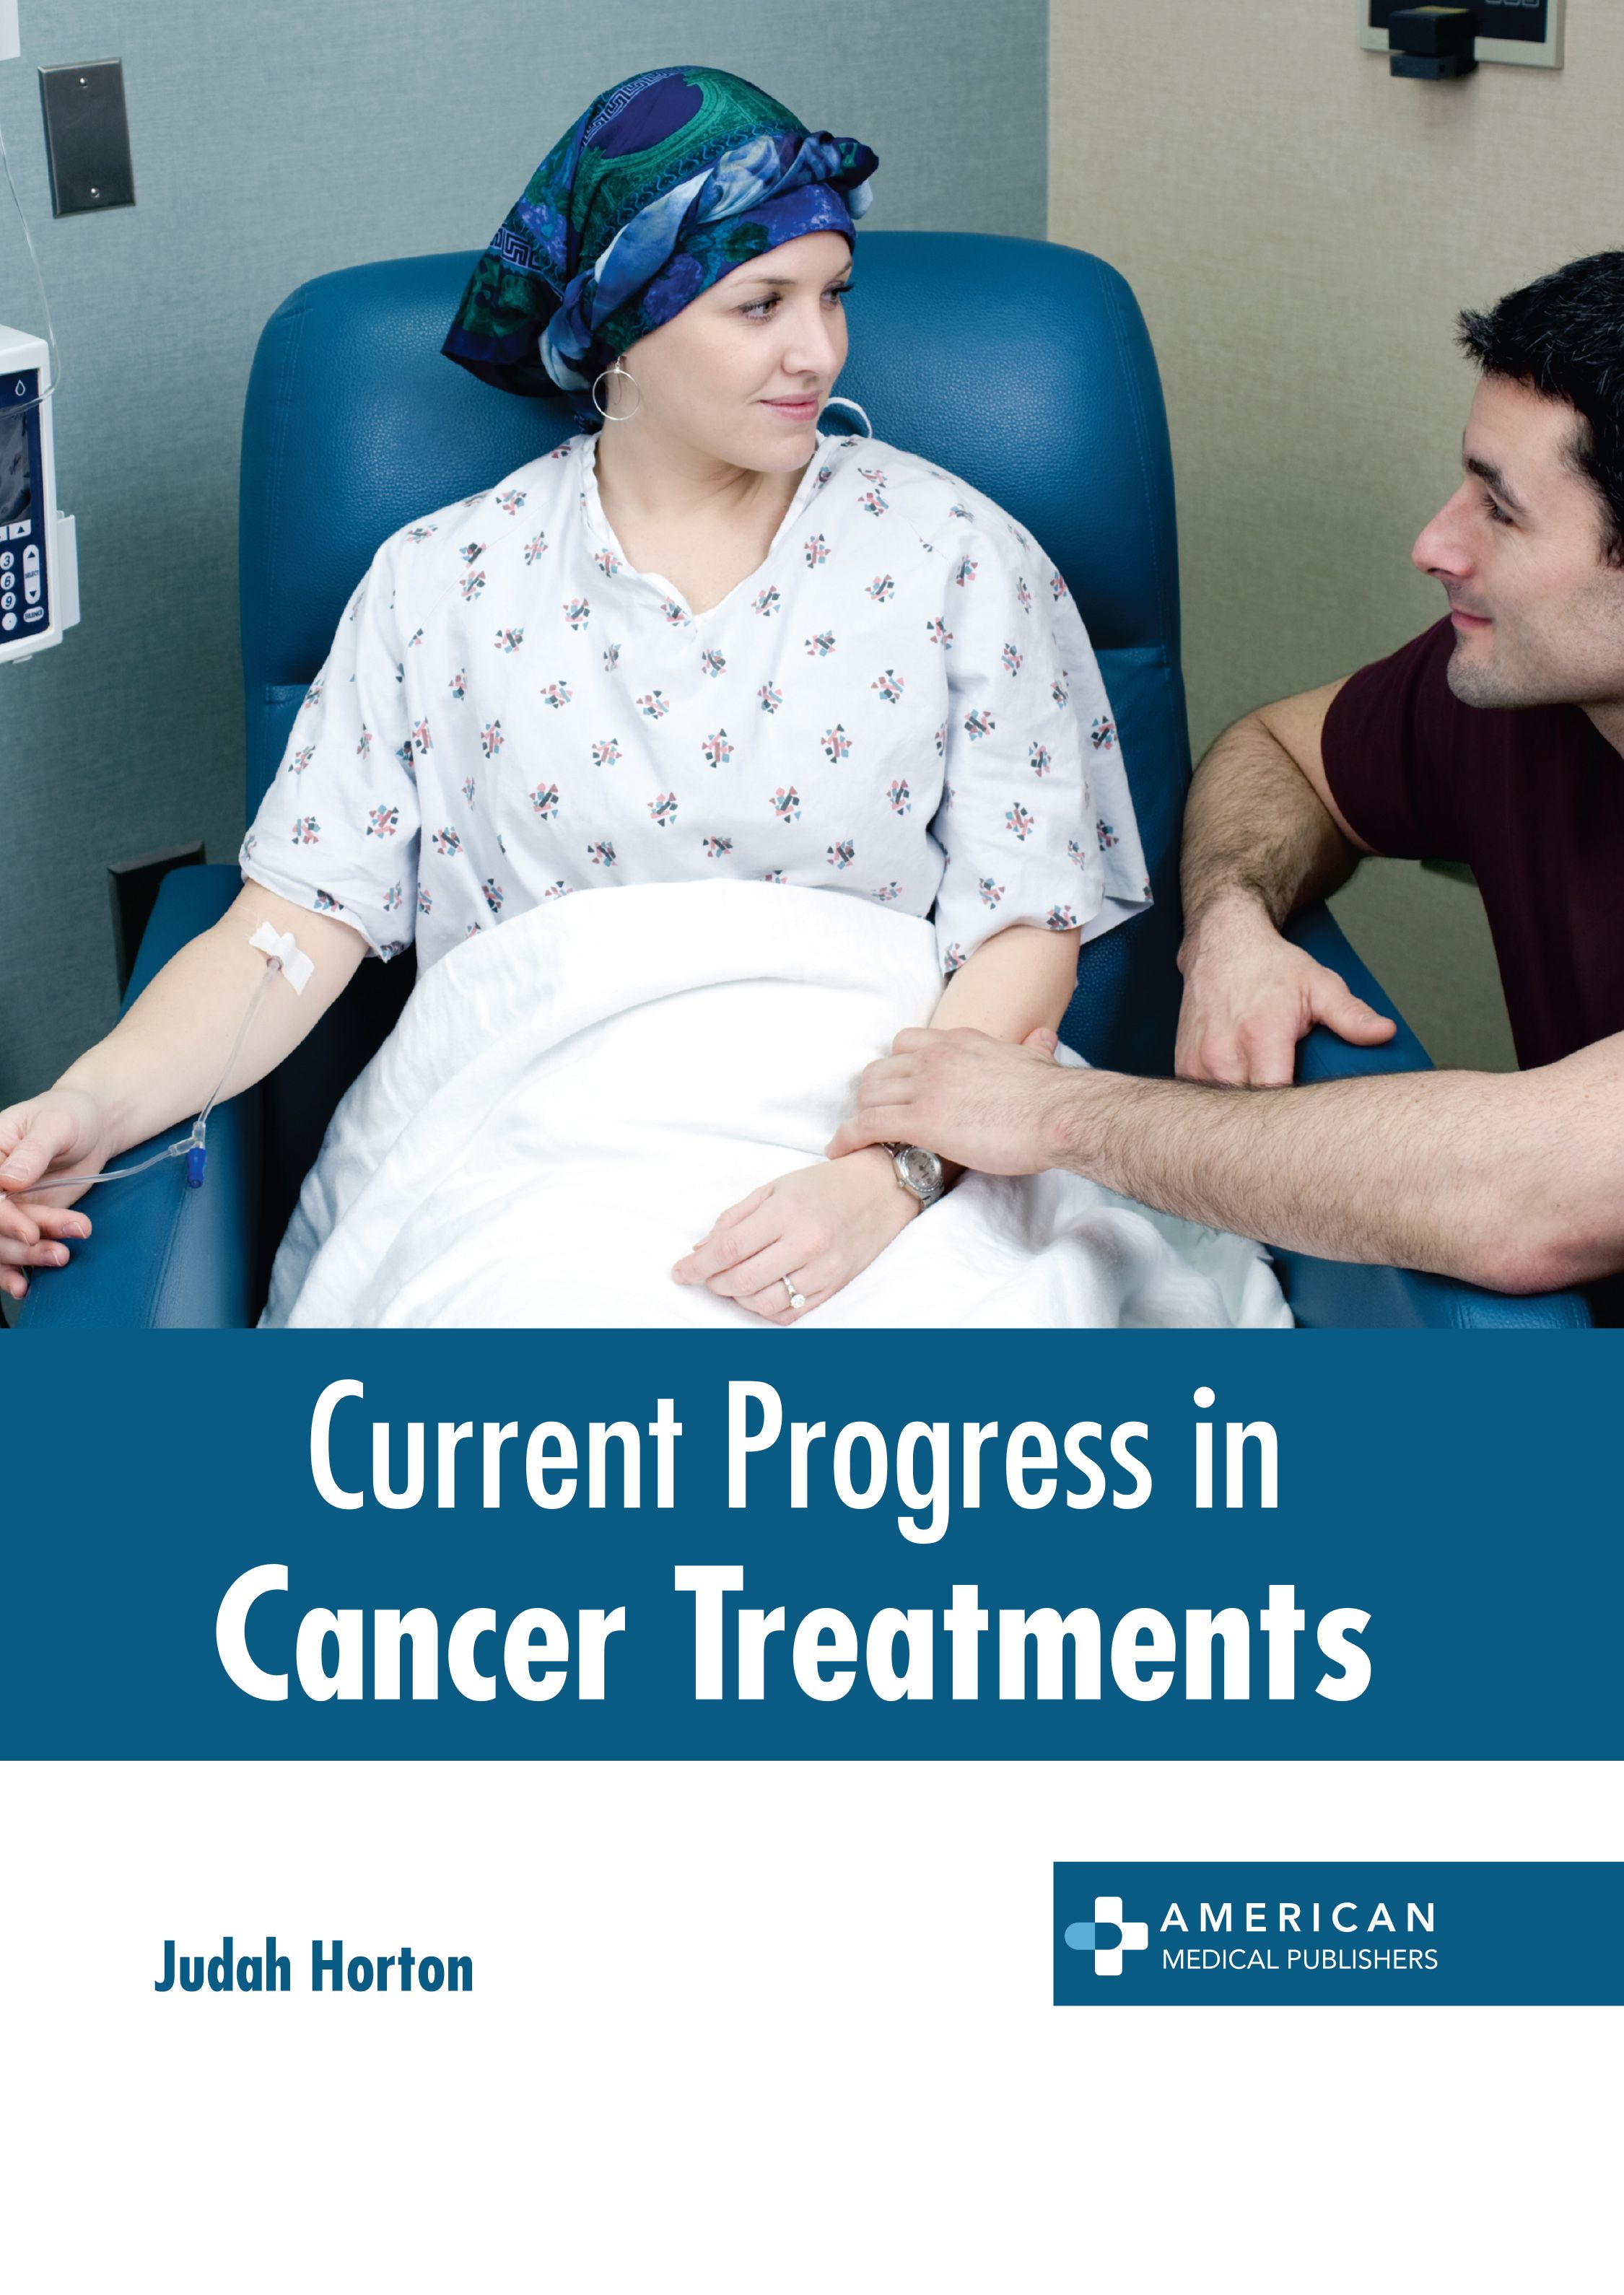 CURRENT PROGRESS IN CANCER TREATMENTS